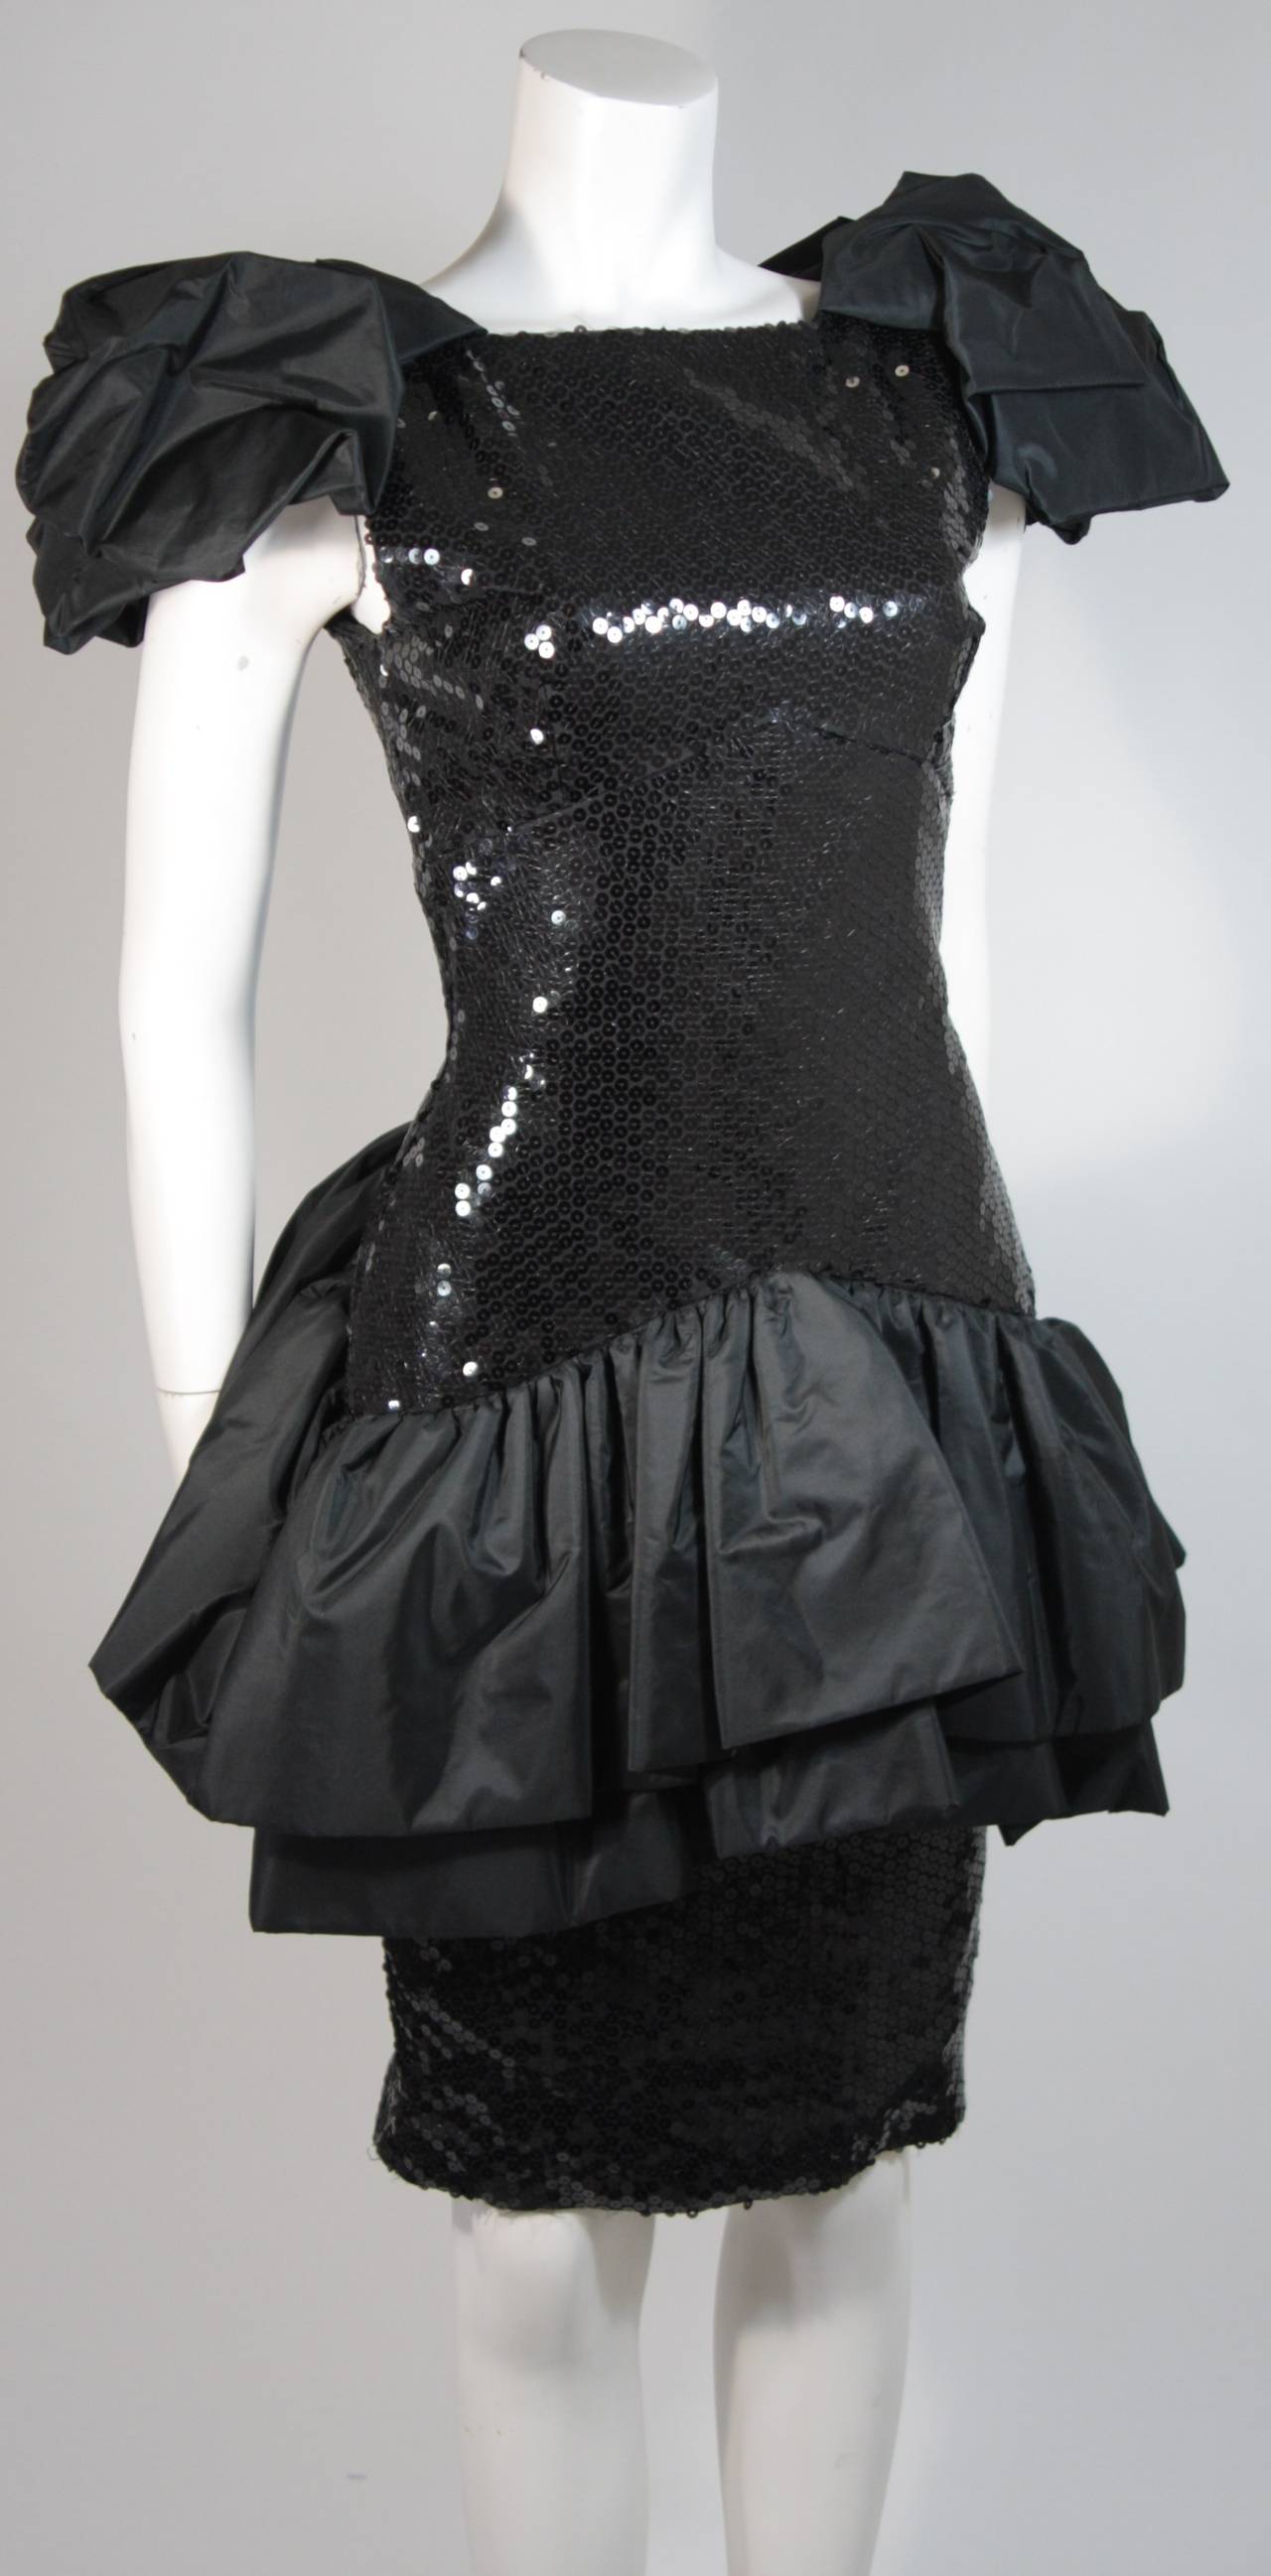 Vicky Tiel Black Sequin Cocktail Dress with Dramatic Gathers Size 38 2